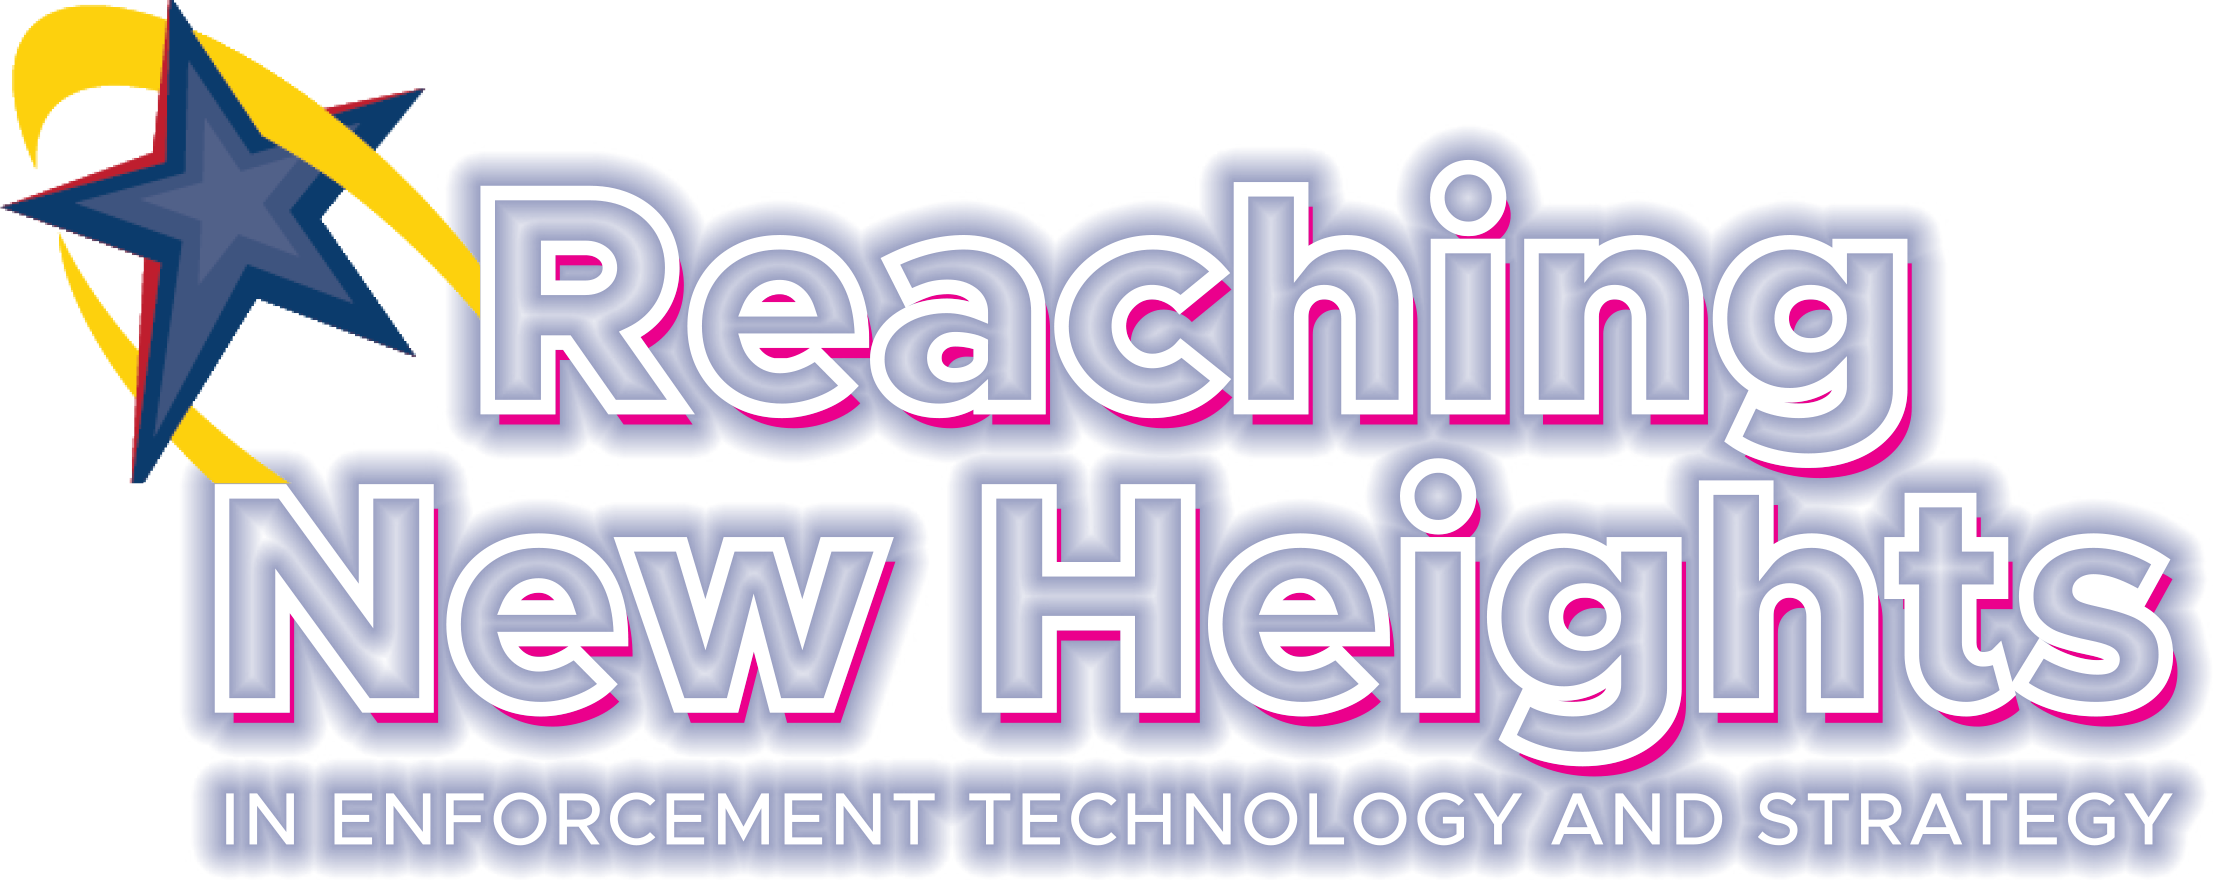 Reaching New Heights in Enforcement Technology and Strategy